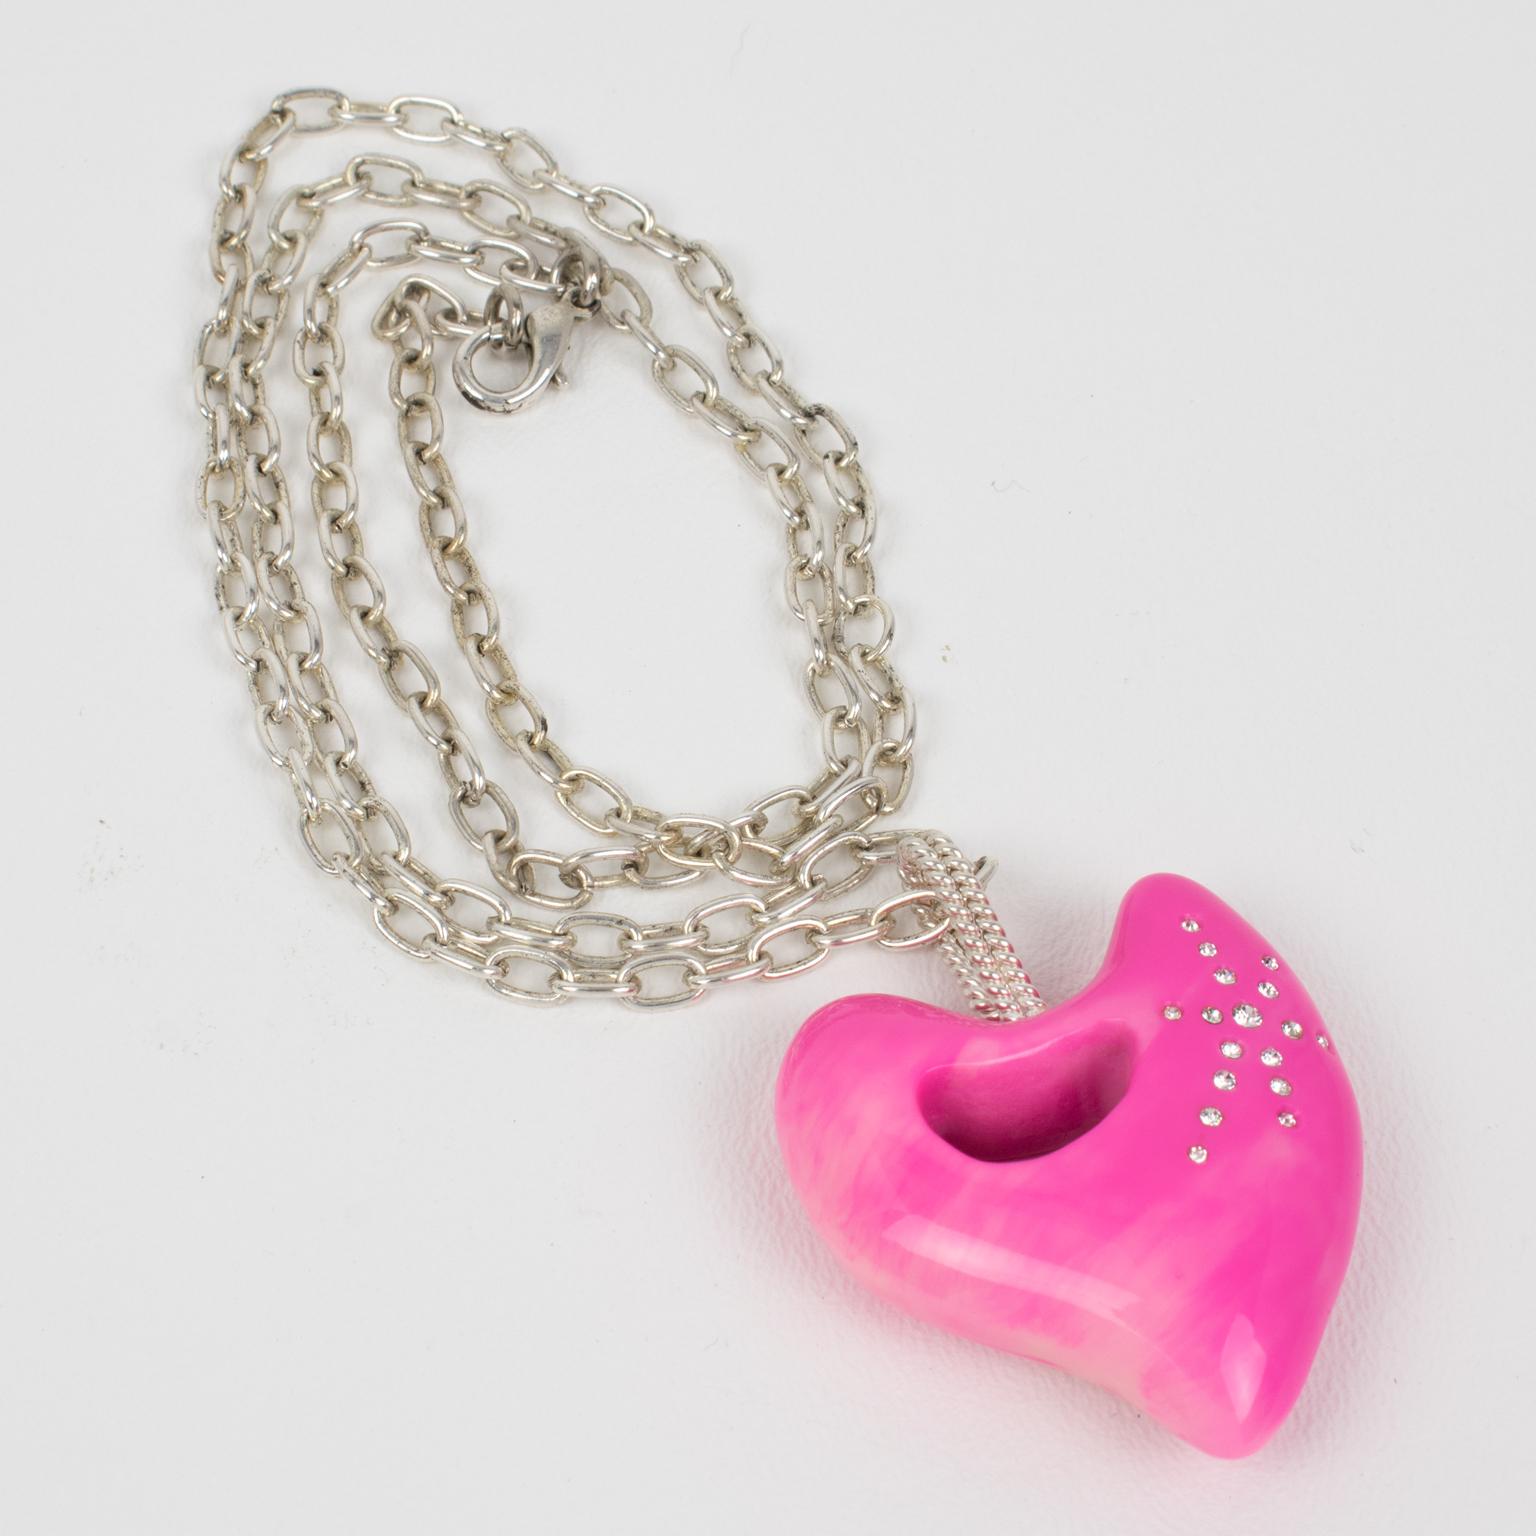 Women's Christian Lacroix Silver Plate Chain Necklace with Hot Pink Resin Heart For Sale